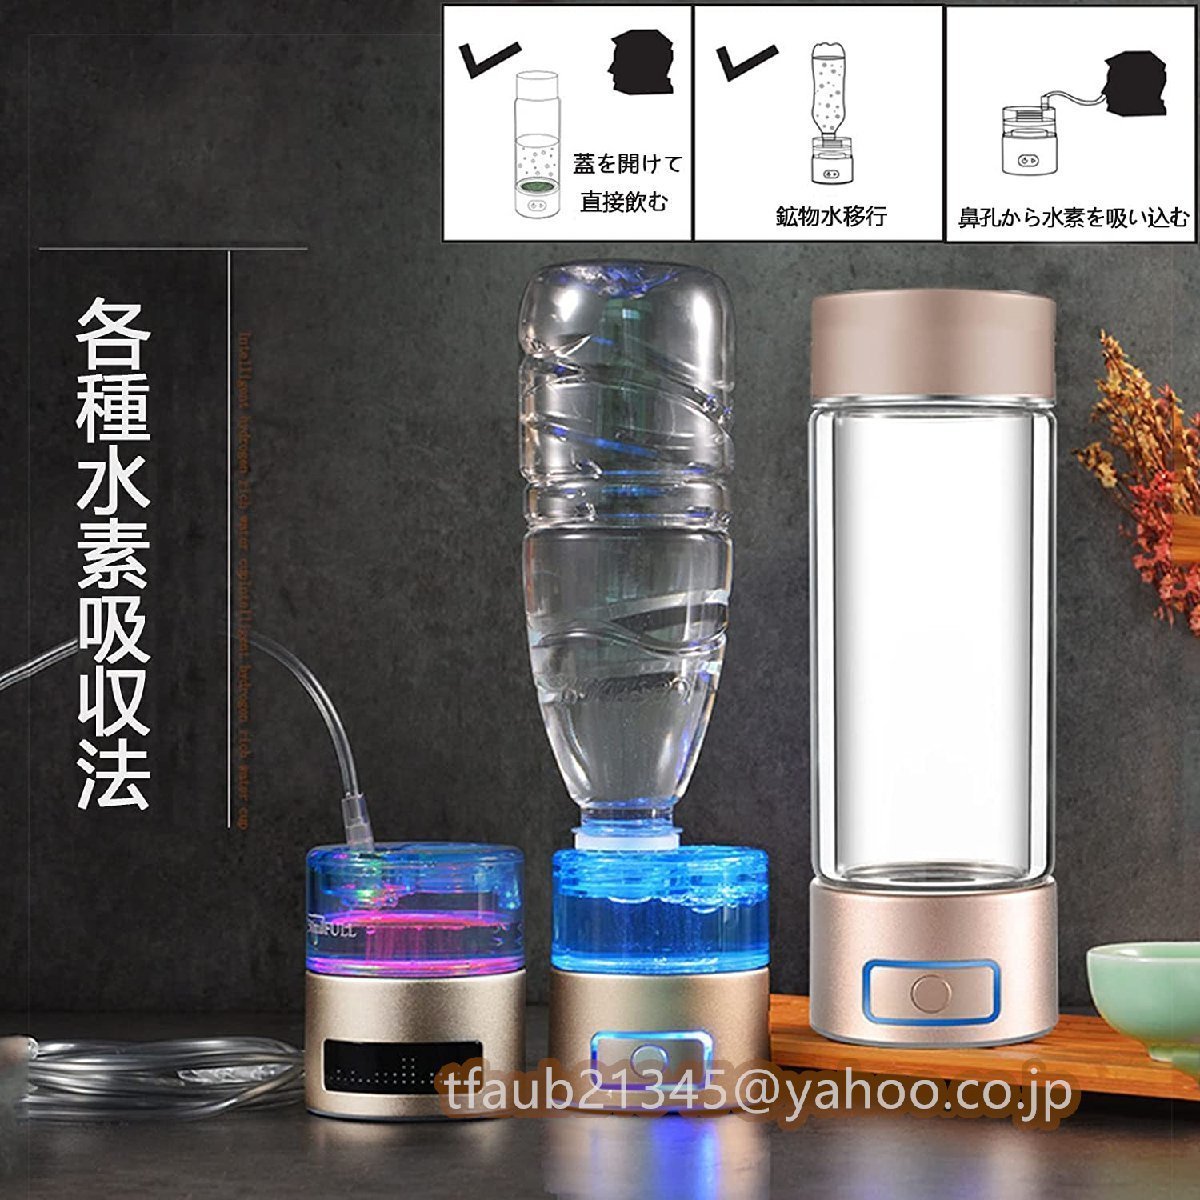  super high density water element aquatic . vessel mobile USB rechargeable water element water bottle cold water / hot water circulation one pcs three position 400ML water element aquatic . hour 3 minute 2000ppb 18 minute 6000ppb carrying convenience 